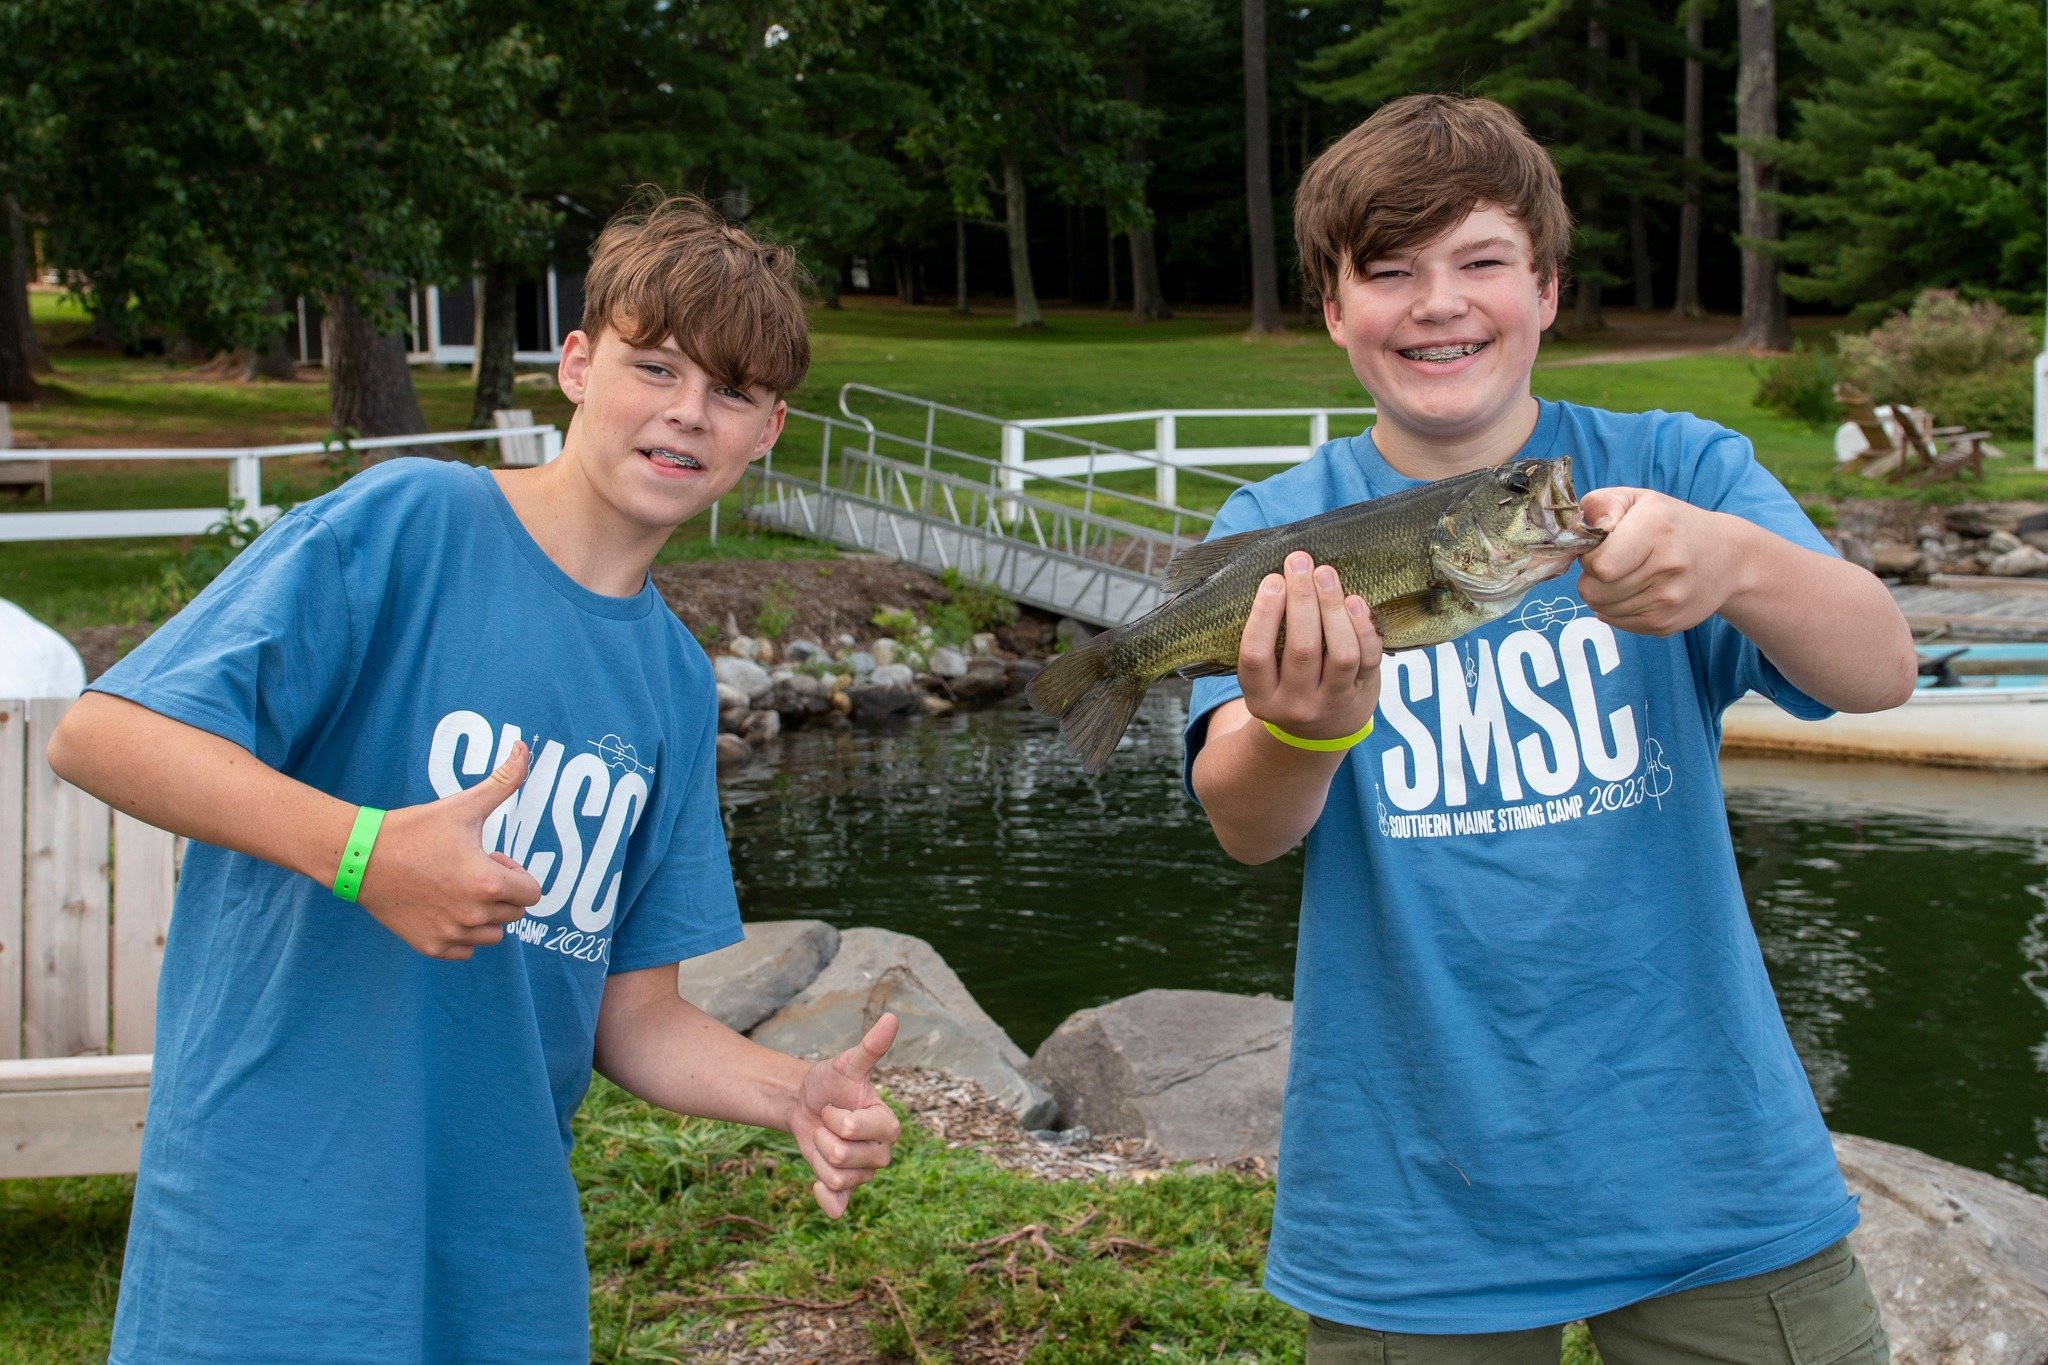 A lesser-known activity option at camp is fishing. Luckily, our kitchen provides all the food so you don't have to. Comment a music-related fish pun. The cringier, the better. 

#fishing #lake #maine #camp #summercamp #southernmainestringcamp #musicc